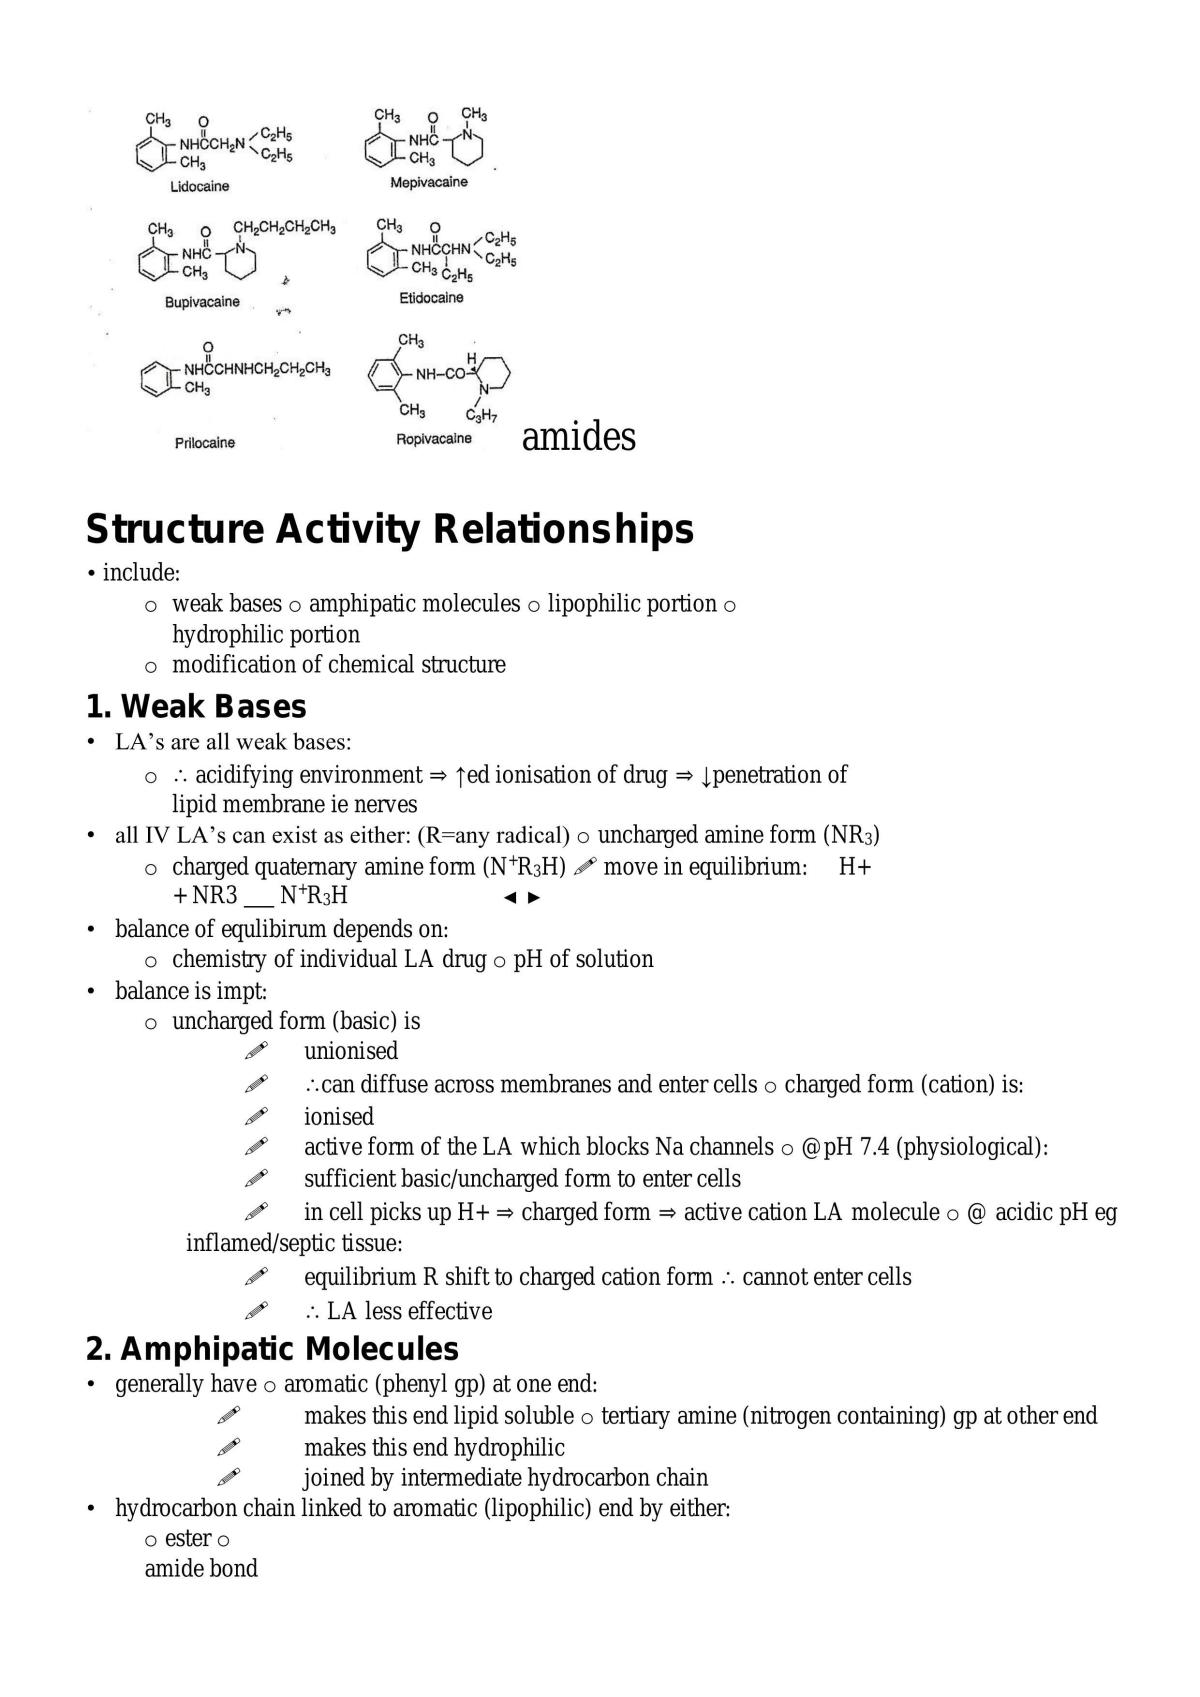 Advanced Pharmacology Notes - Page 208